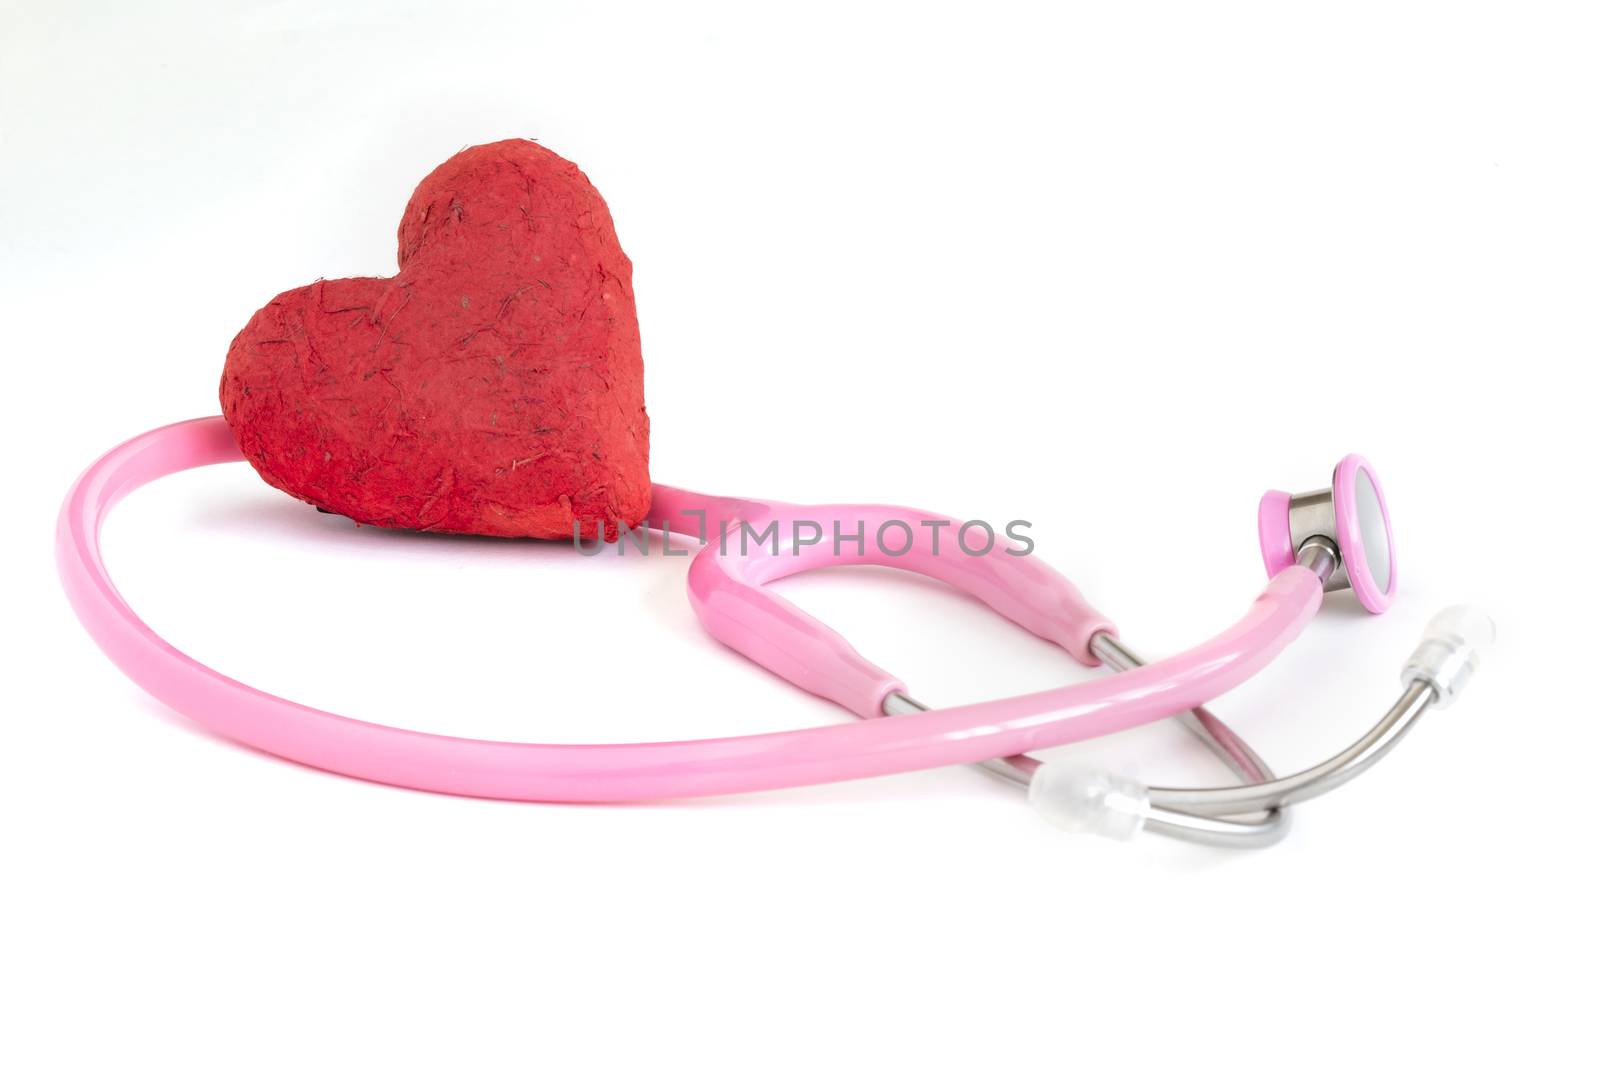 A stethoscope and a handmade red paper mache heart. Health care related concept